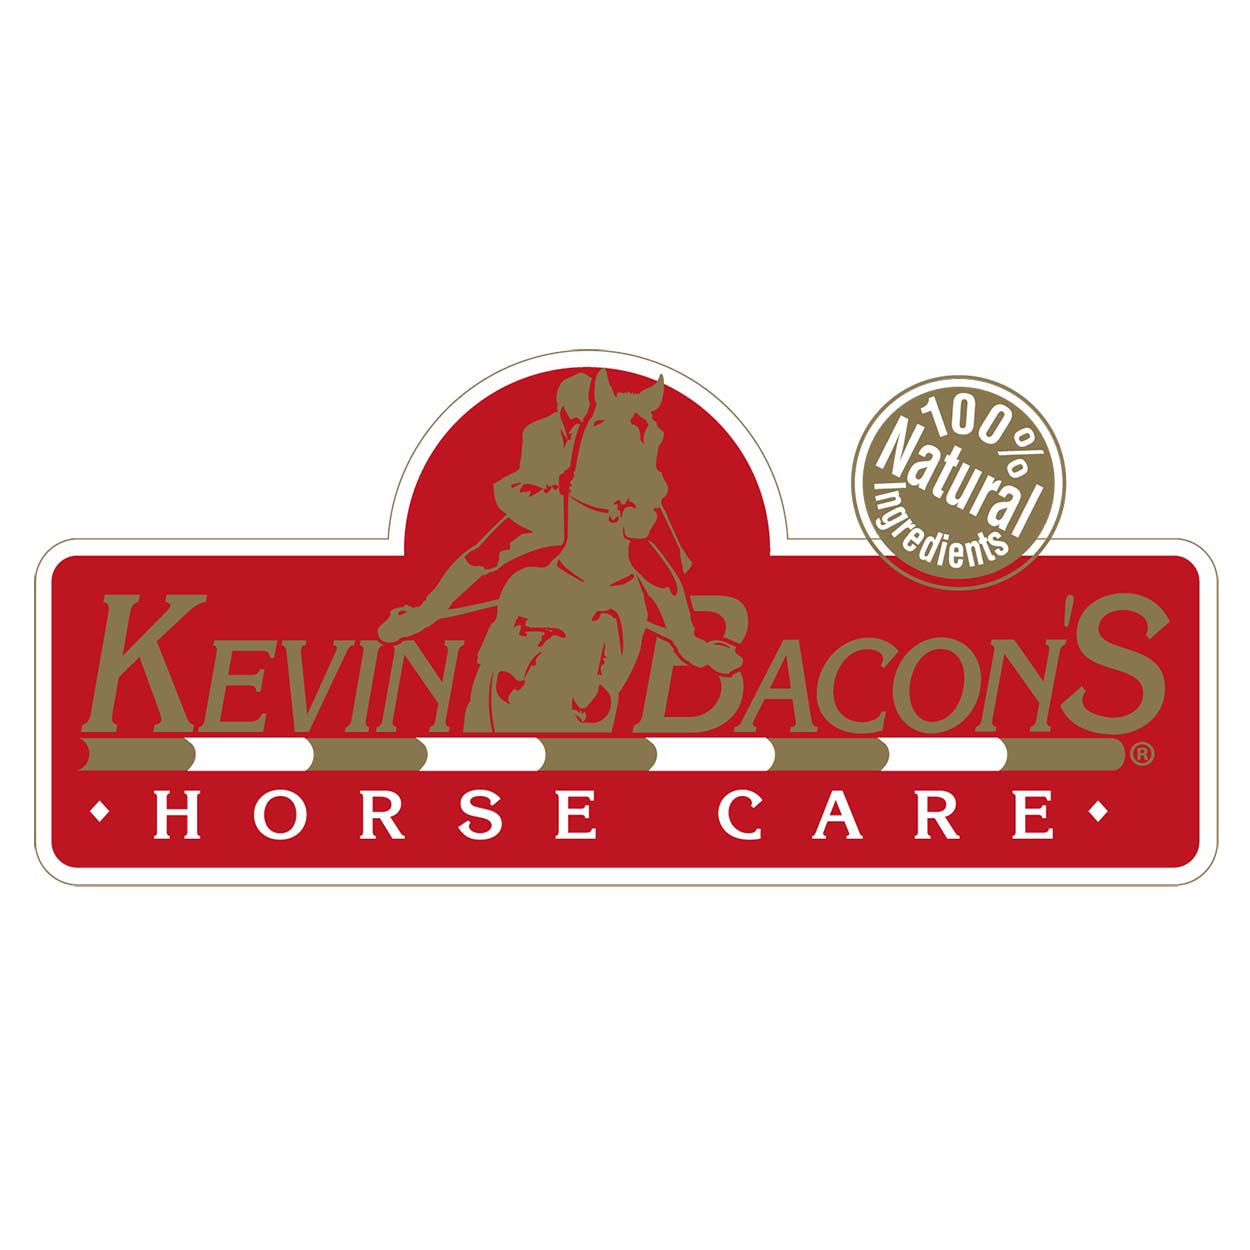 Kevin Bacon`s